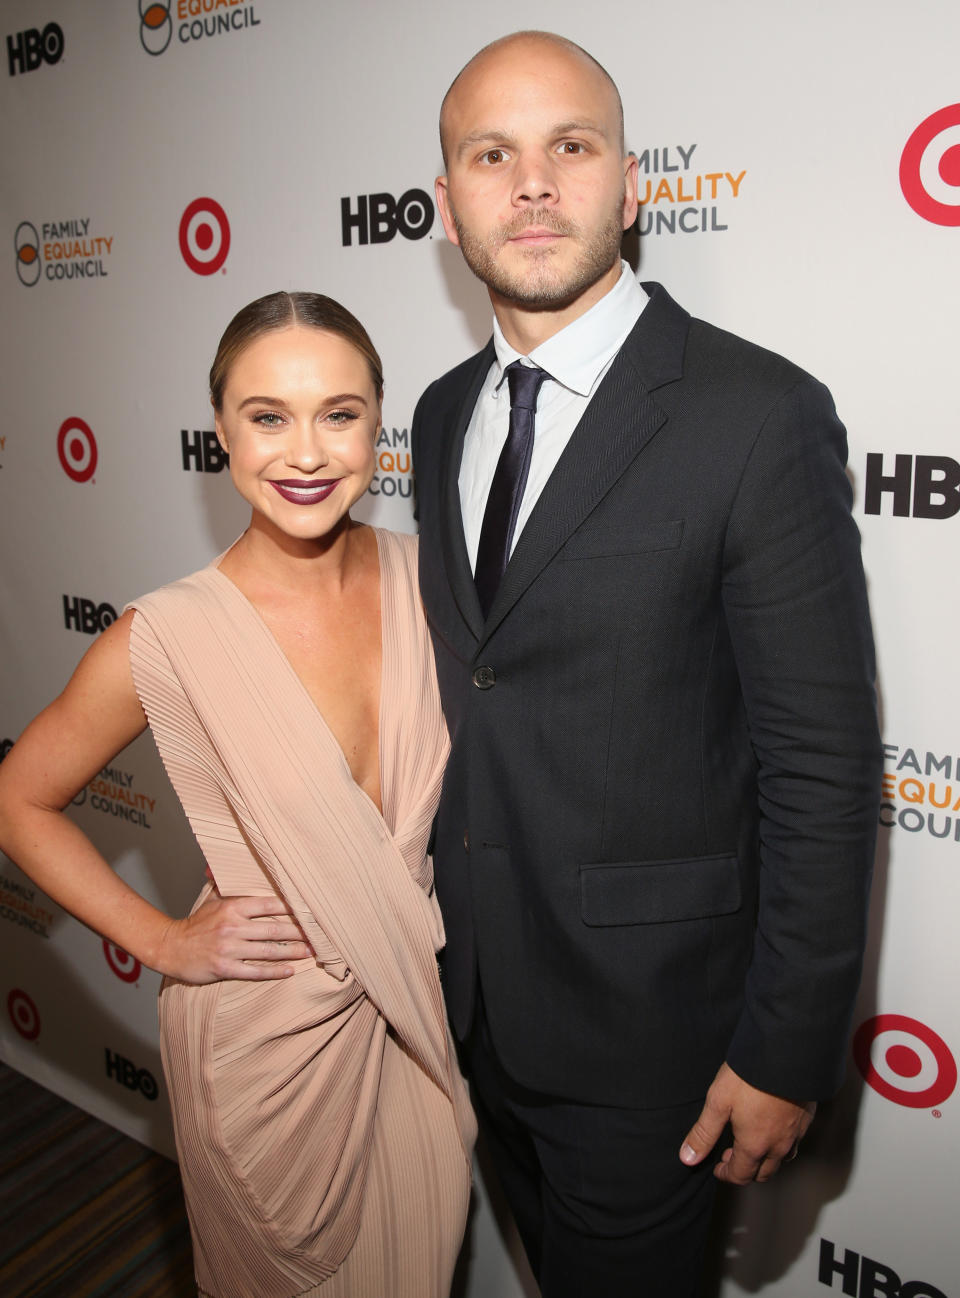 Becca Tobin and Zach Martin arrive at the Family Equality Council's Impact Awards on March 11, 2017